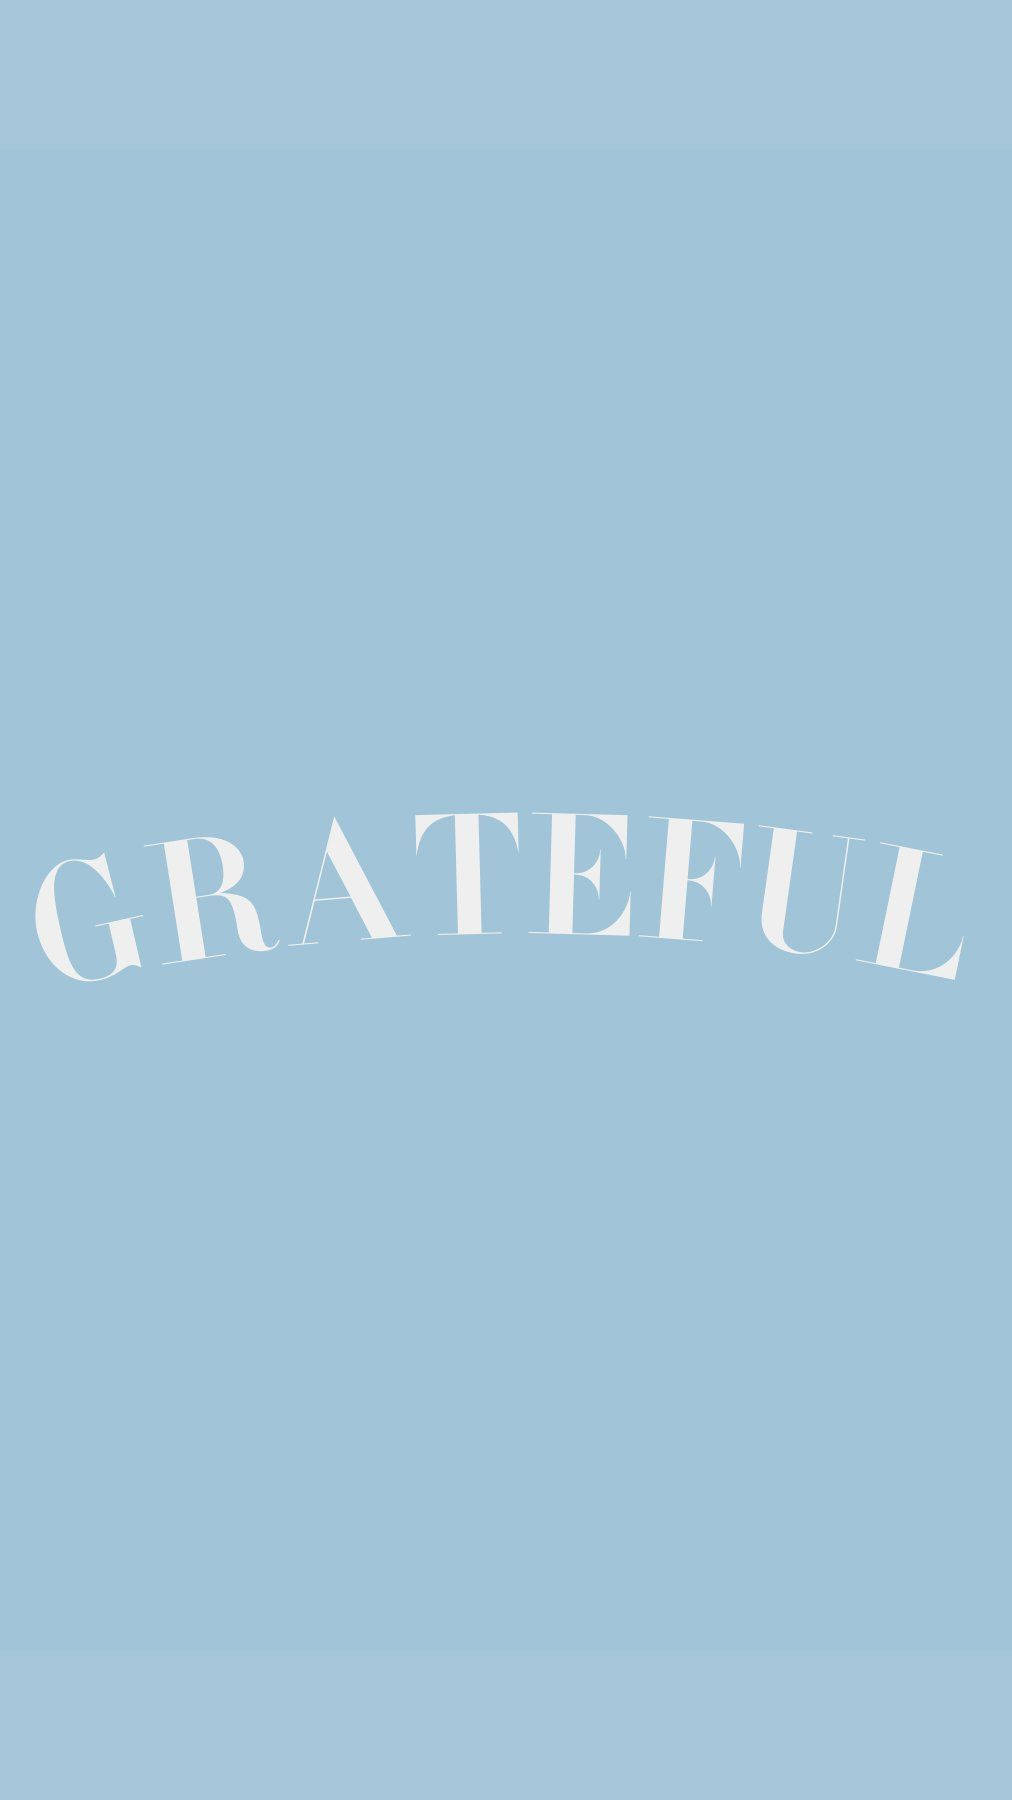 "Grateful" On Blue Aesthetic Quote iPhone Wallpaper